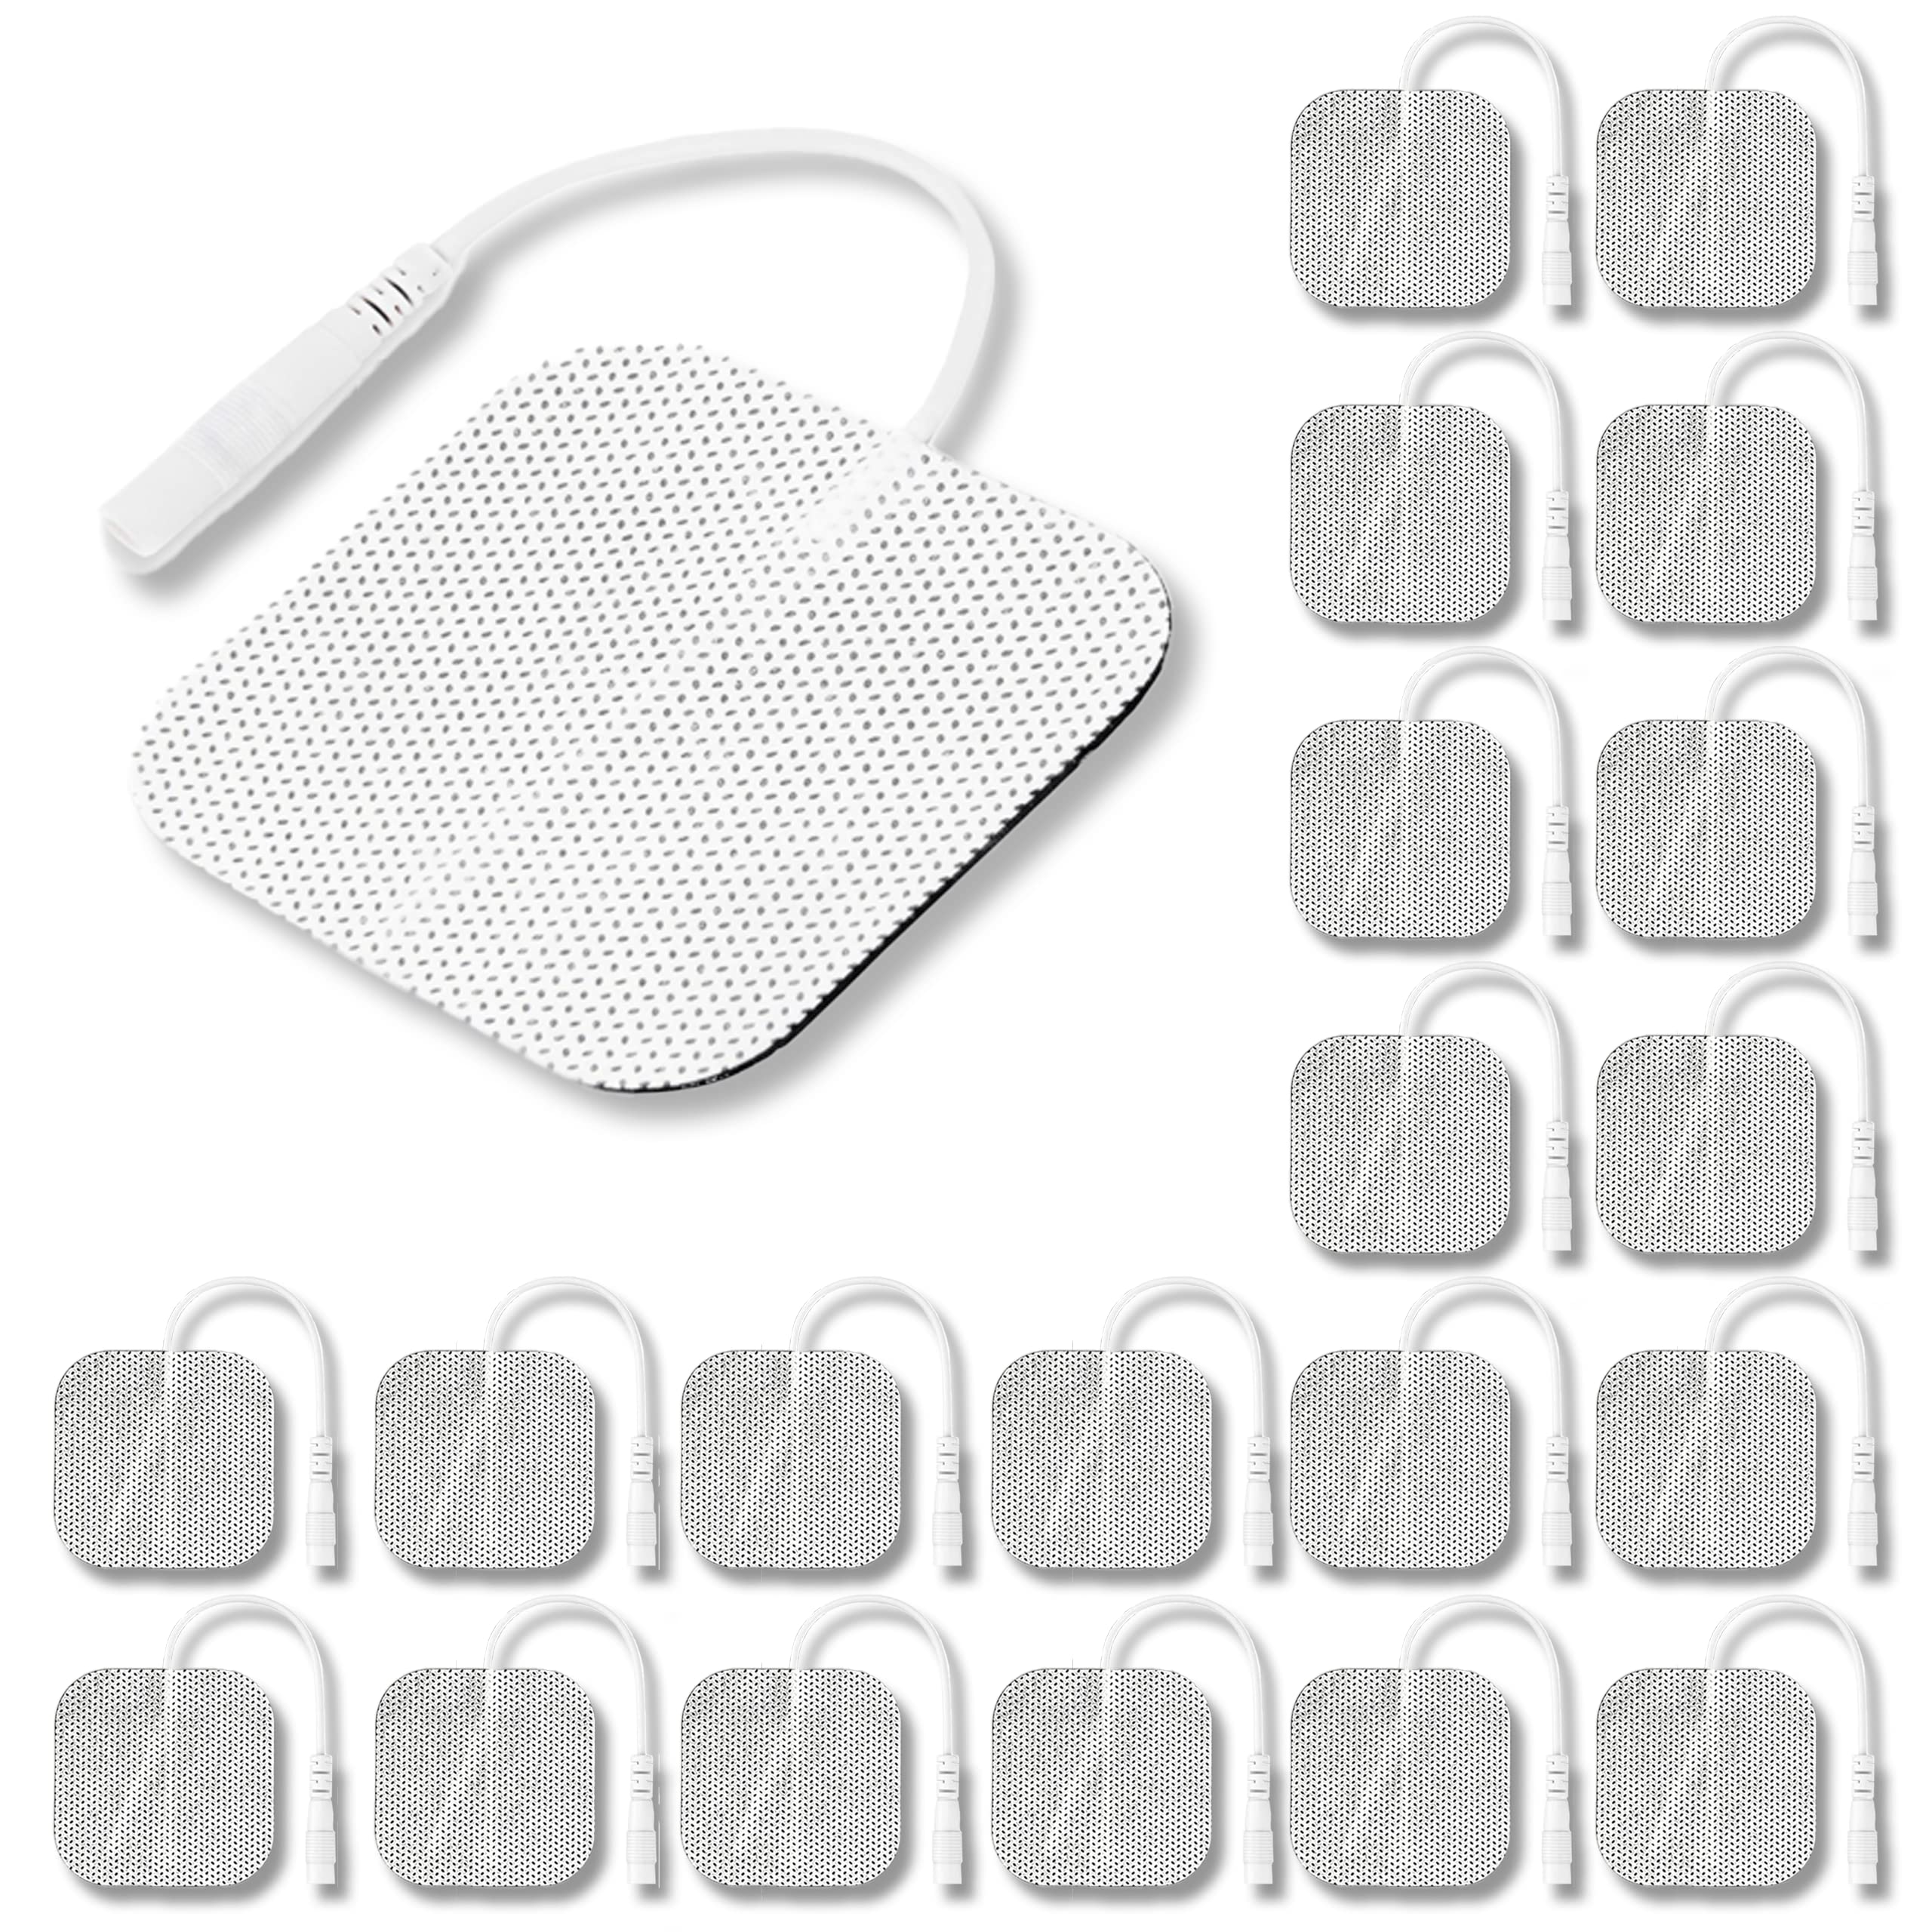 Syrtenty TENS Unit Pads 2X2 3rd Gen Reusable Latex-Free Replacement Pads  Electrode Pads with Upgraded Sticky Electrode Pads Gel and Non-Irritating